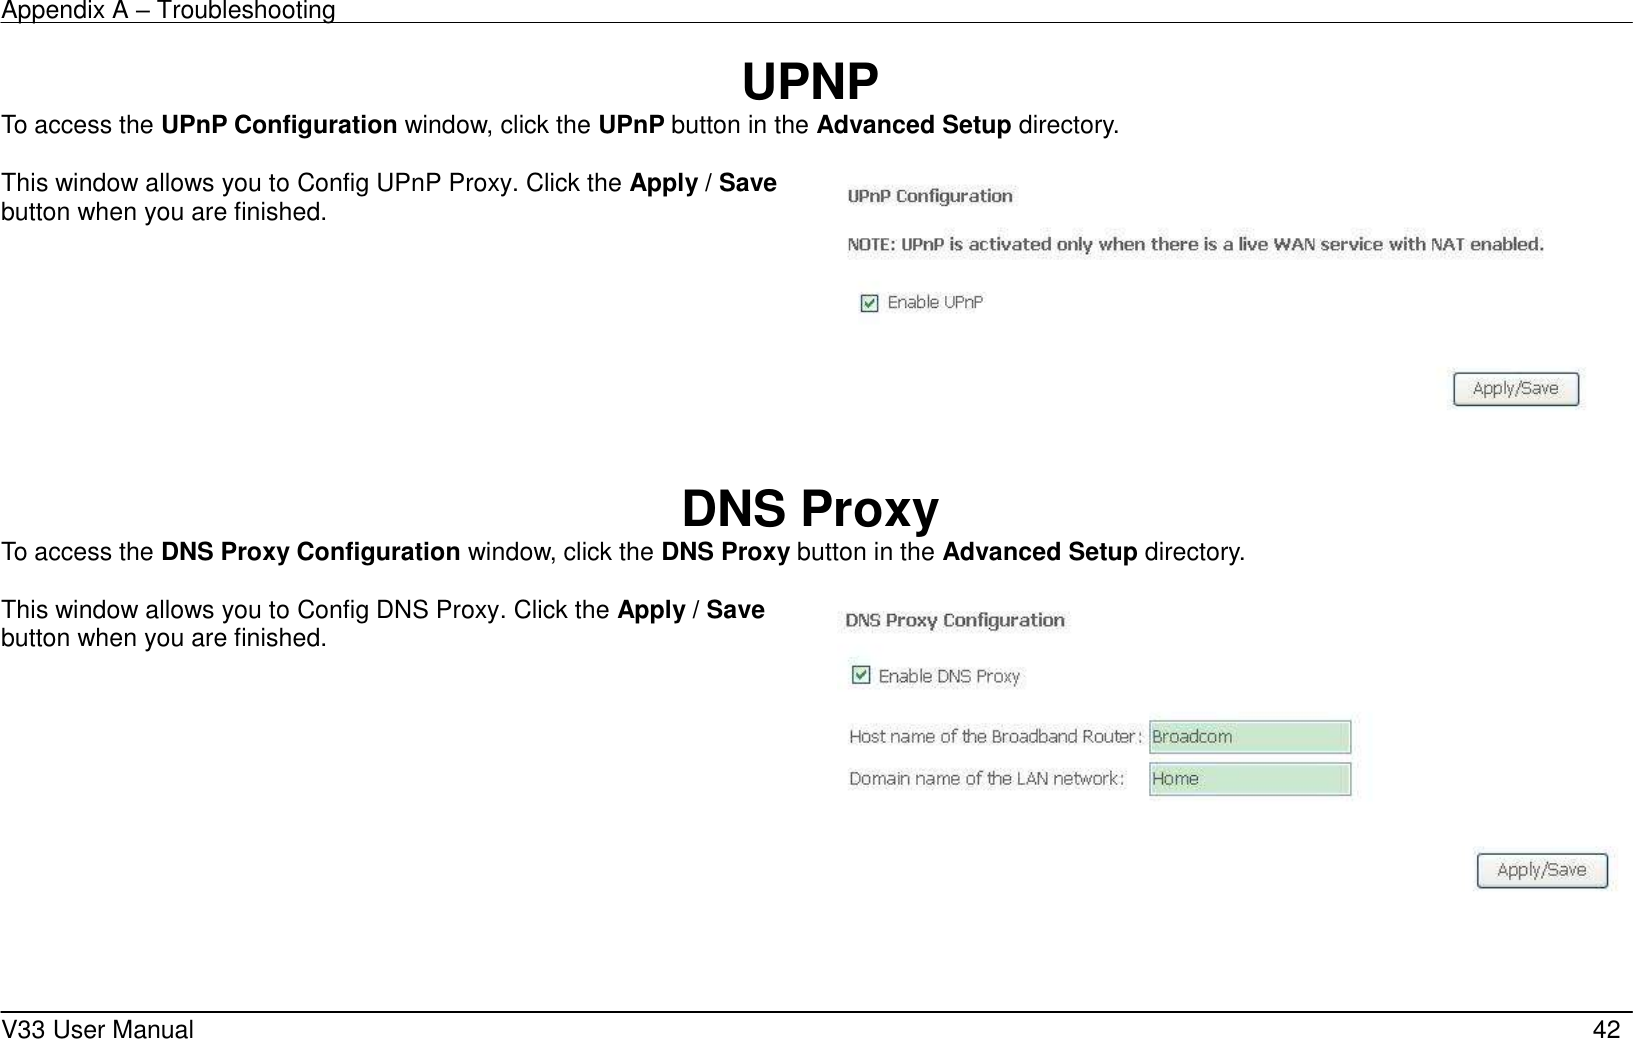 Appendix A – Troubleshooting    V33 User Manual   42 UPNP To access the UPnP Configuration window, click the UPnP button in the Advanced Setup directory.  This window allows you to Config UPnP Proxy. Click the Apply / Save button when you are finished.       DNS Proxy To access the DNS Proxy Configuration window, click the DNS Proxy button in the Advanced Setup directory.  This window allows you to Config DNS Proxy. Click the Apply / Save button when you are finished.      